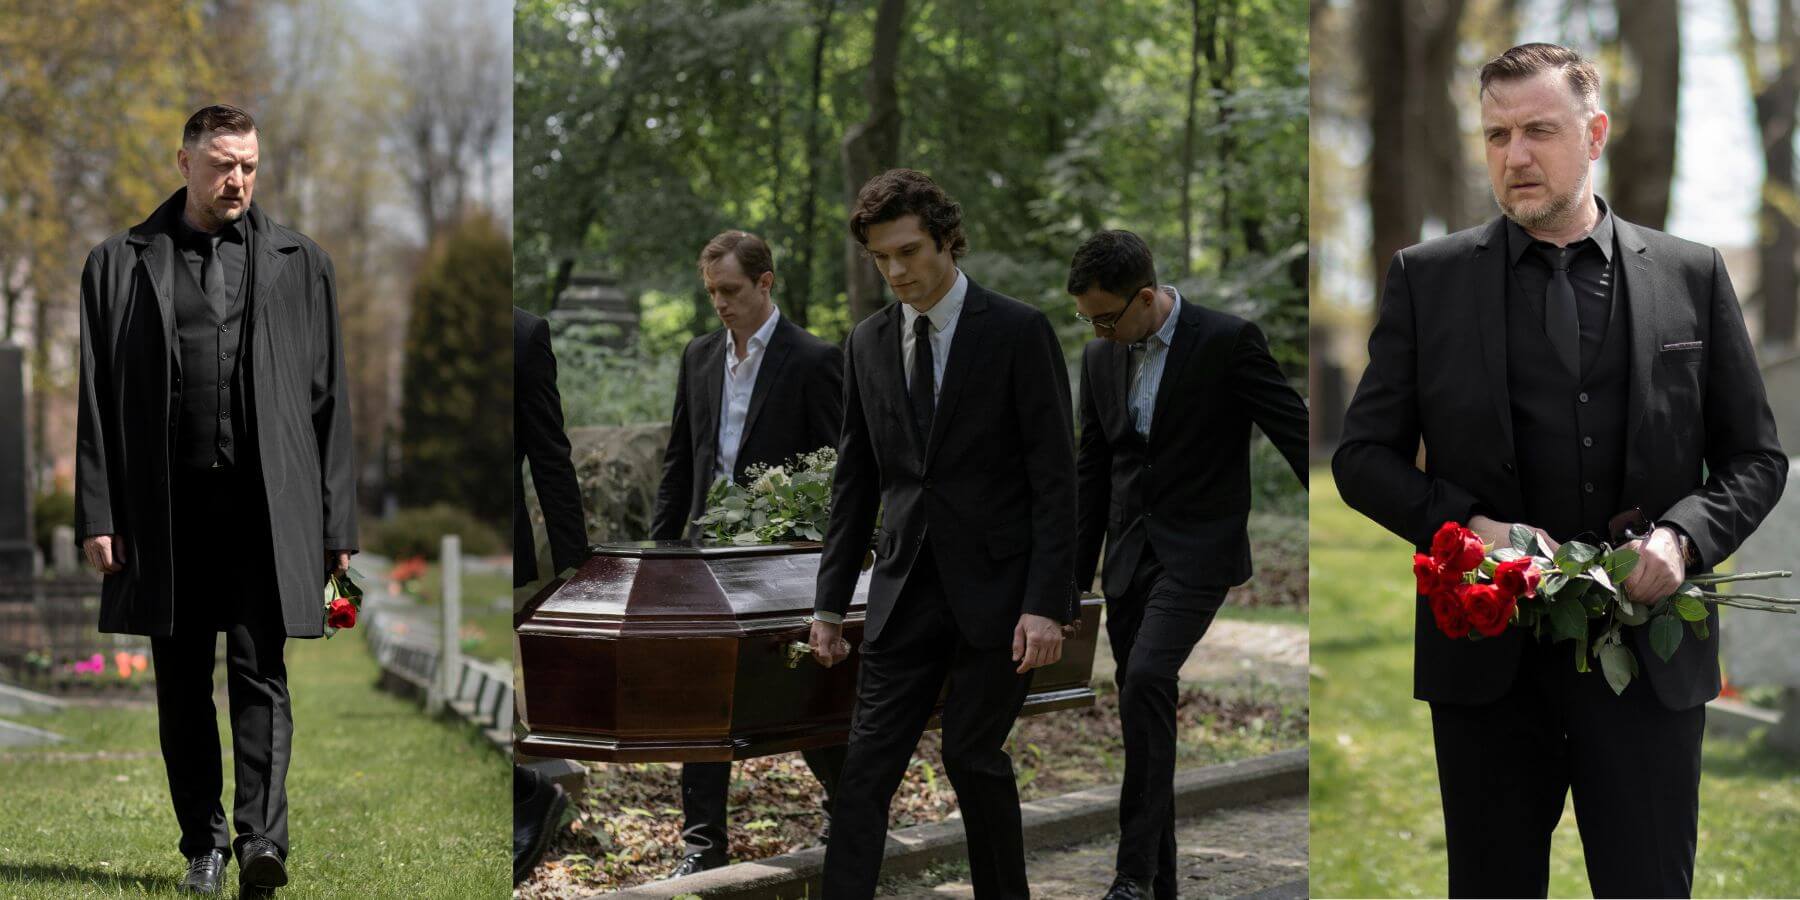 A Complete Guide to What to Wear to a Funeral for Men